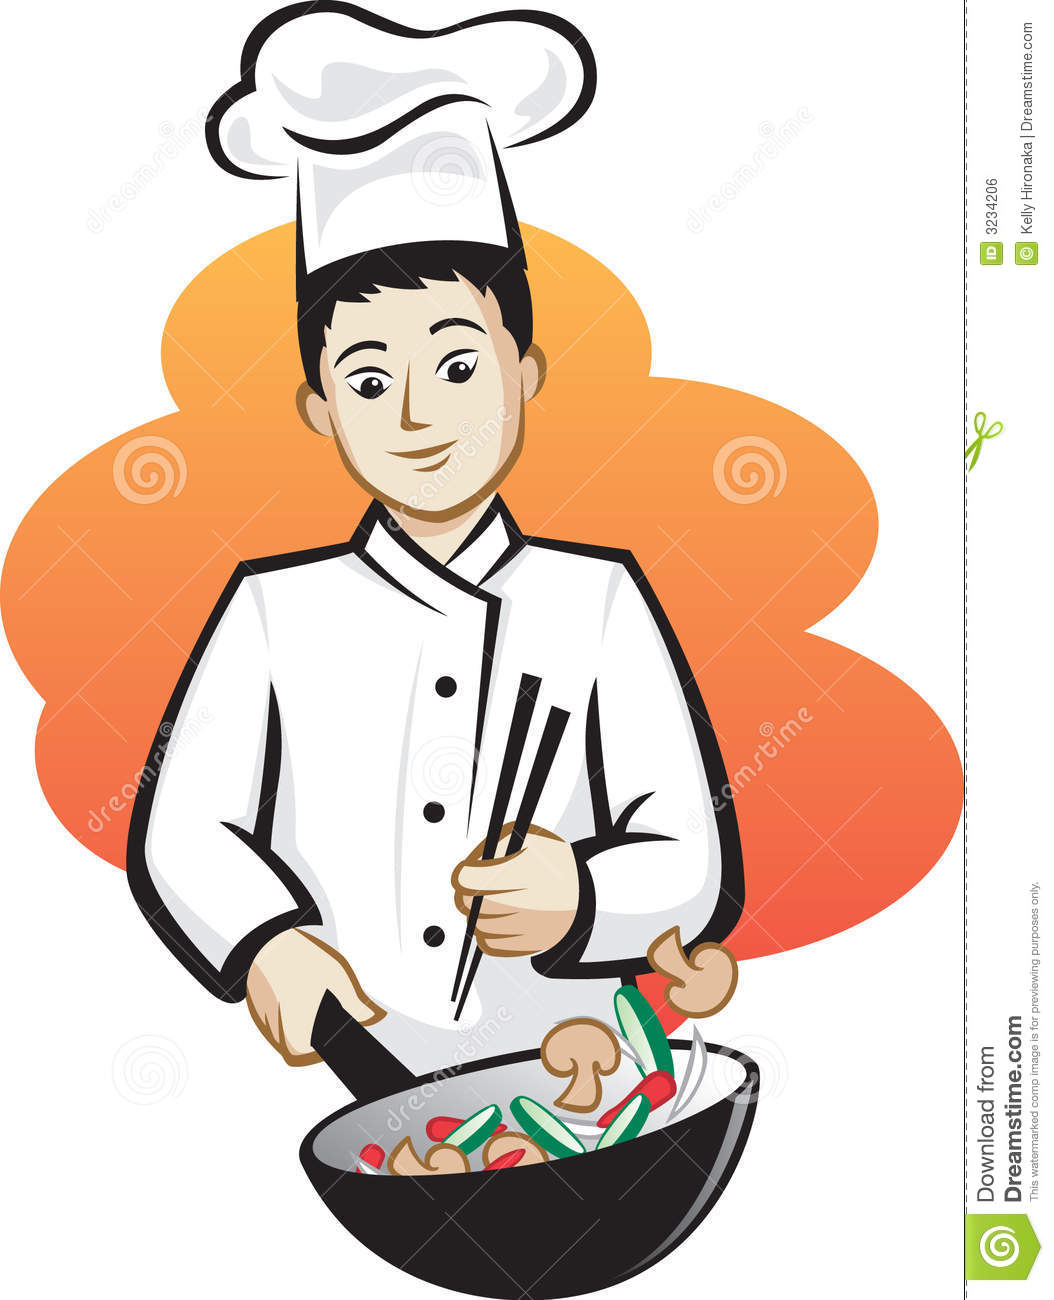 Asian Chef Royalty Free Stock Image   Image  3234206